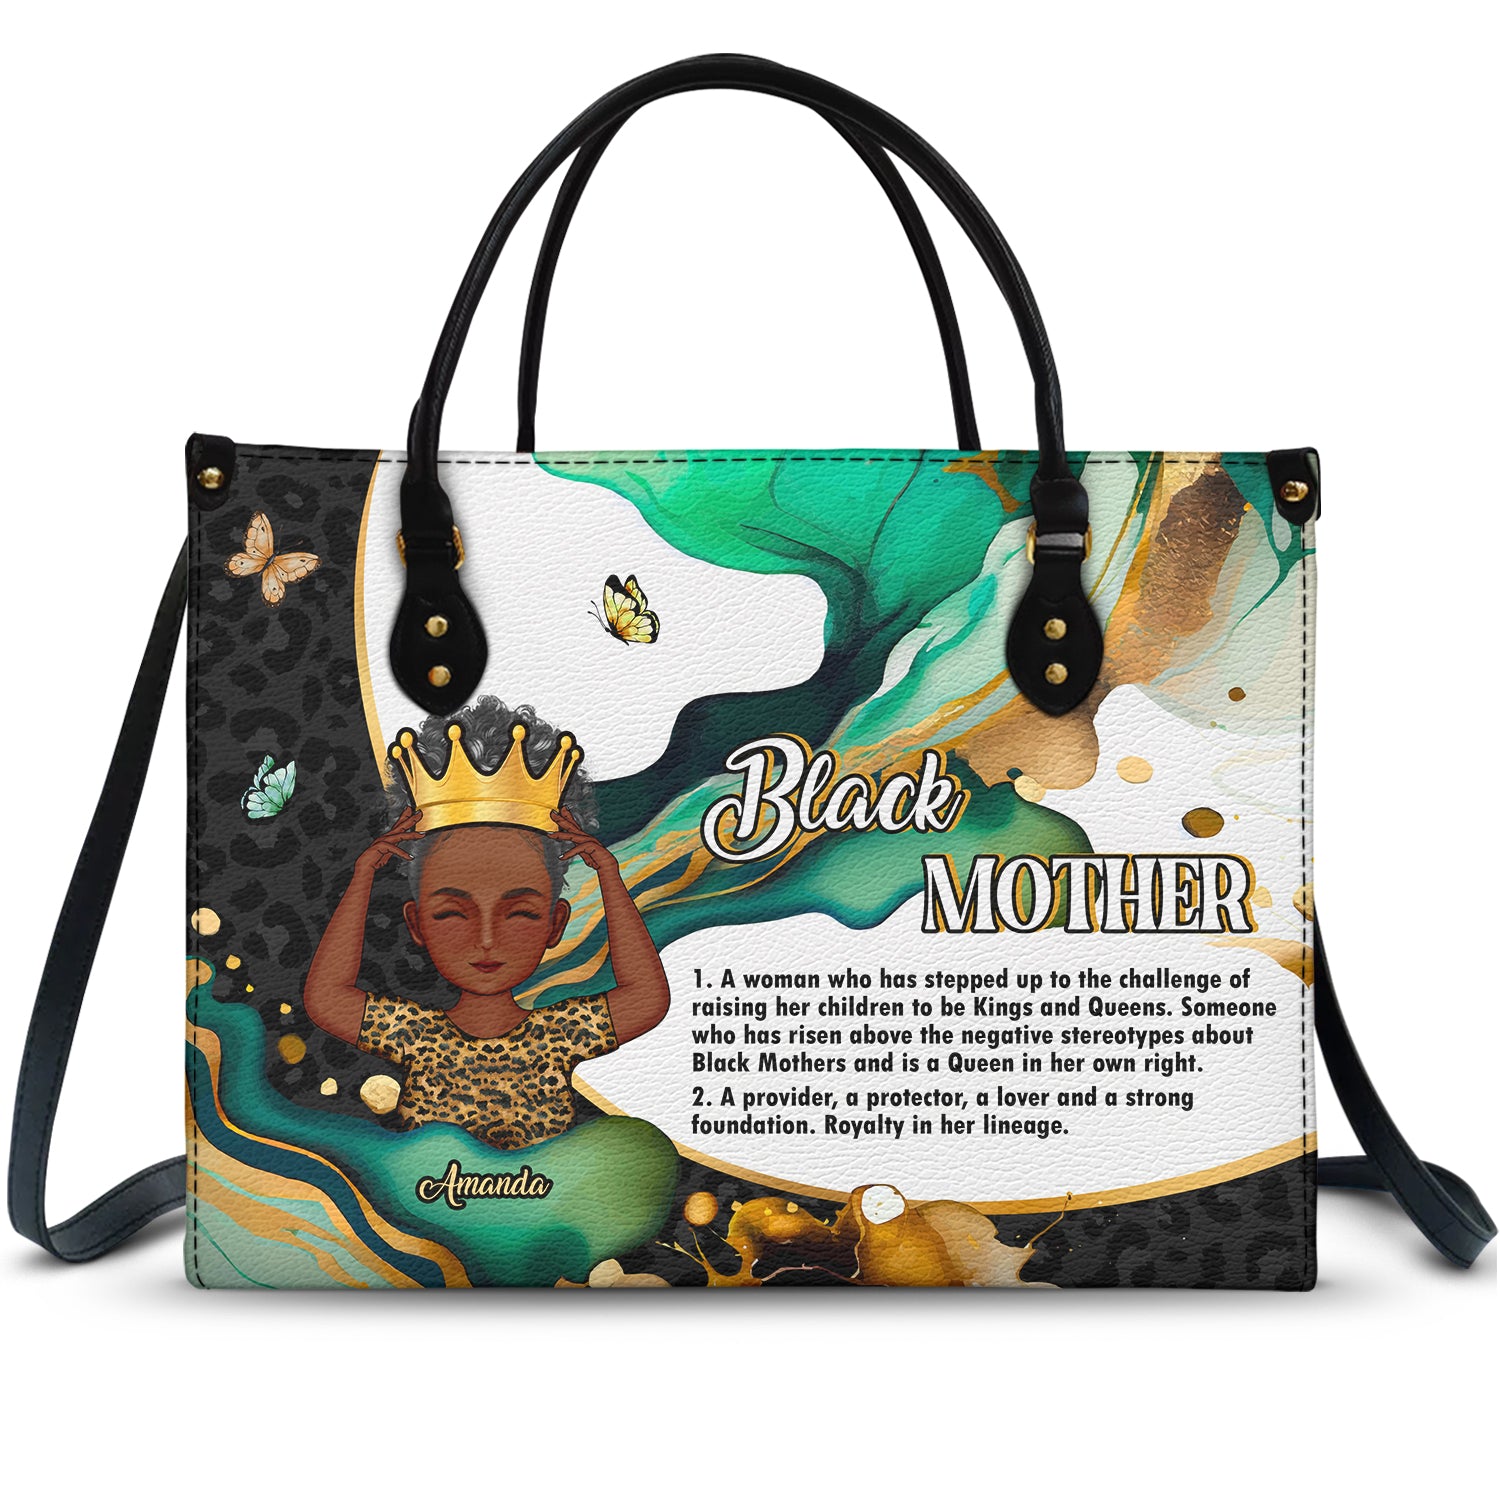 Black Mother - Gift For Mother - Personalized Leather Bag